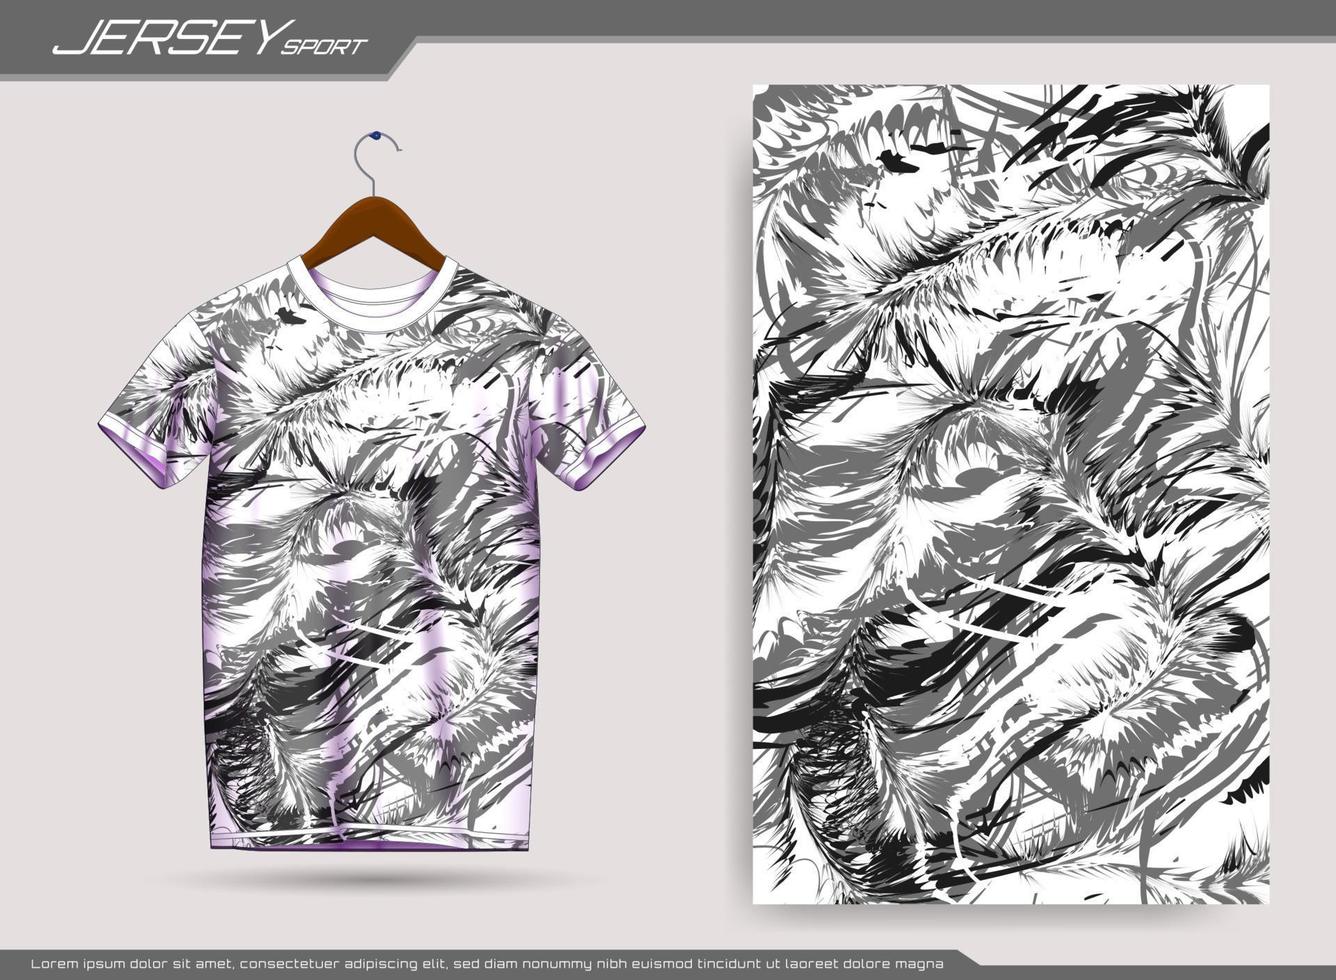 Jersey sports t-shirt. Soccer jersey mockup for soccer club. Suitable for jersey, background, poster, etc. vector